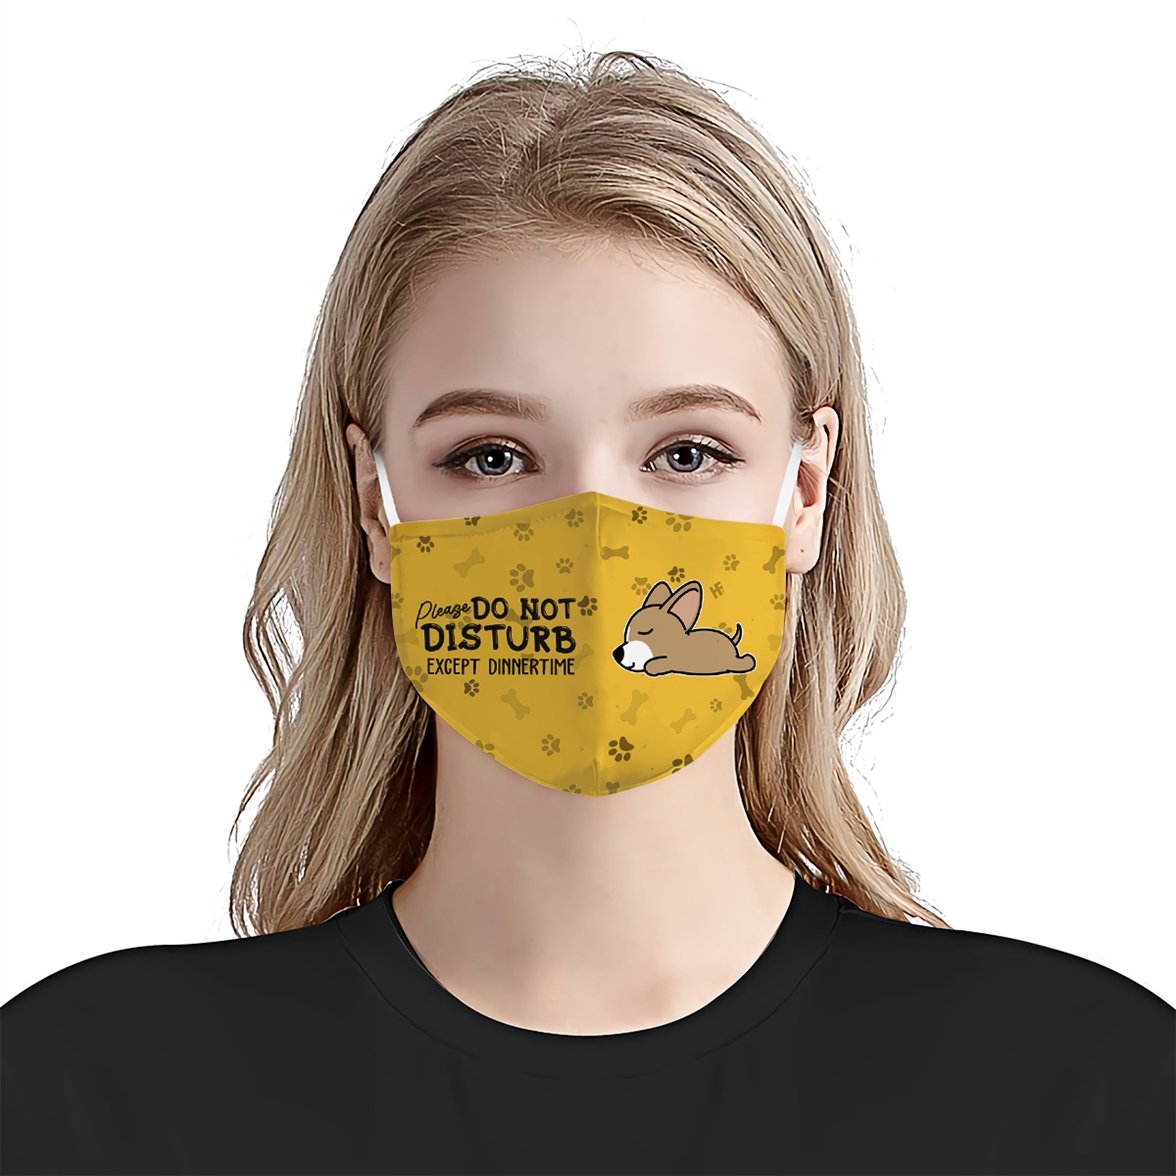 Please Do Not Disturb Except Dinnertime Chihuahua Yellow EZ16 0807 Face Mask